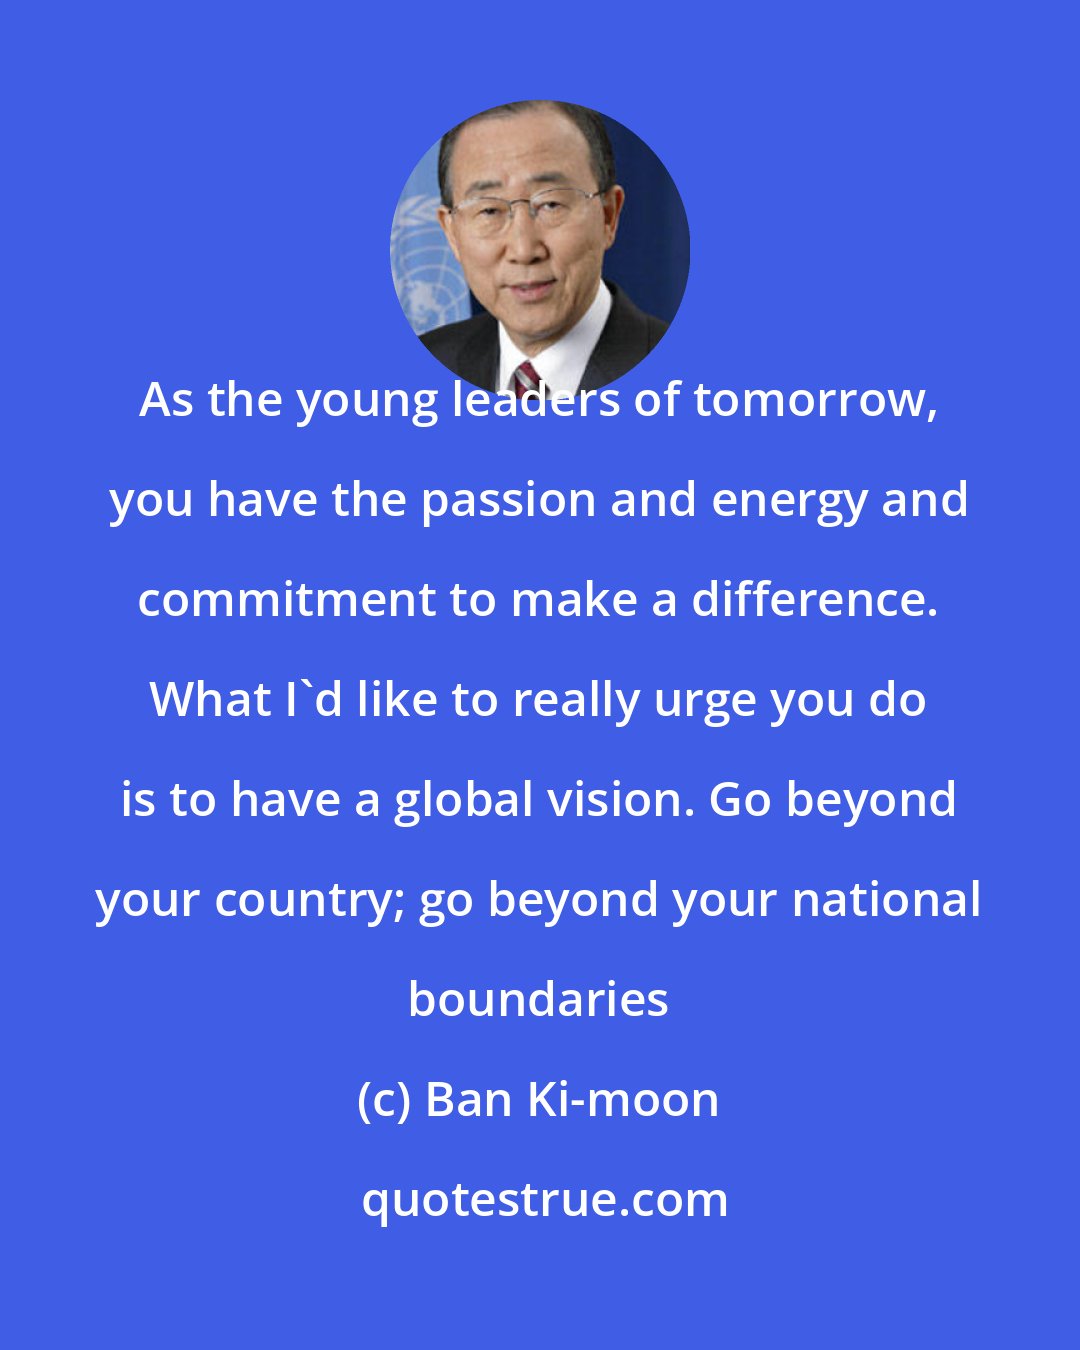 Ban Ki-moon: As the young leaders of tomorrow, you have the passion and energy and commitment to make a difference. What I'd like to really urge you do is to have a global vision. Go beyond your country; go beyond your national boundaries